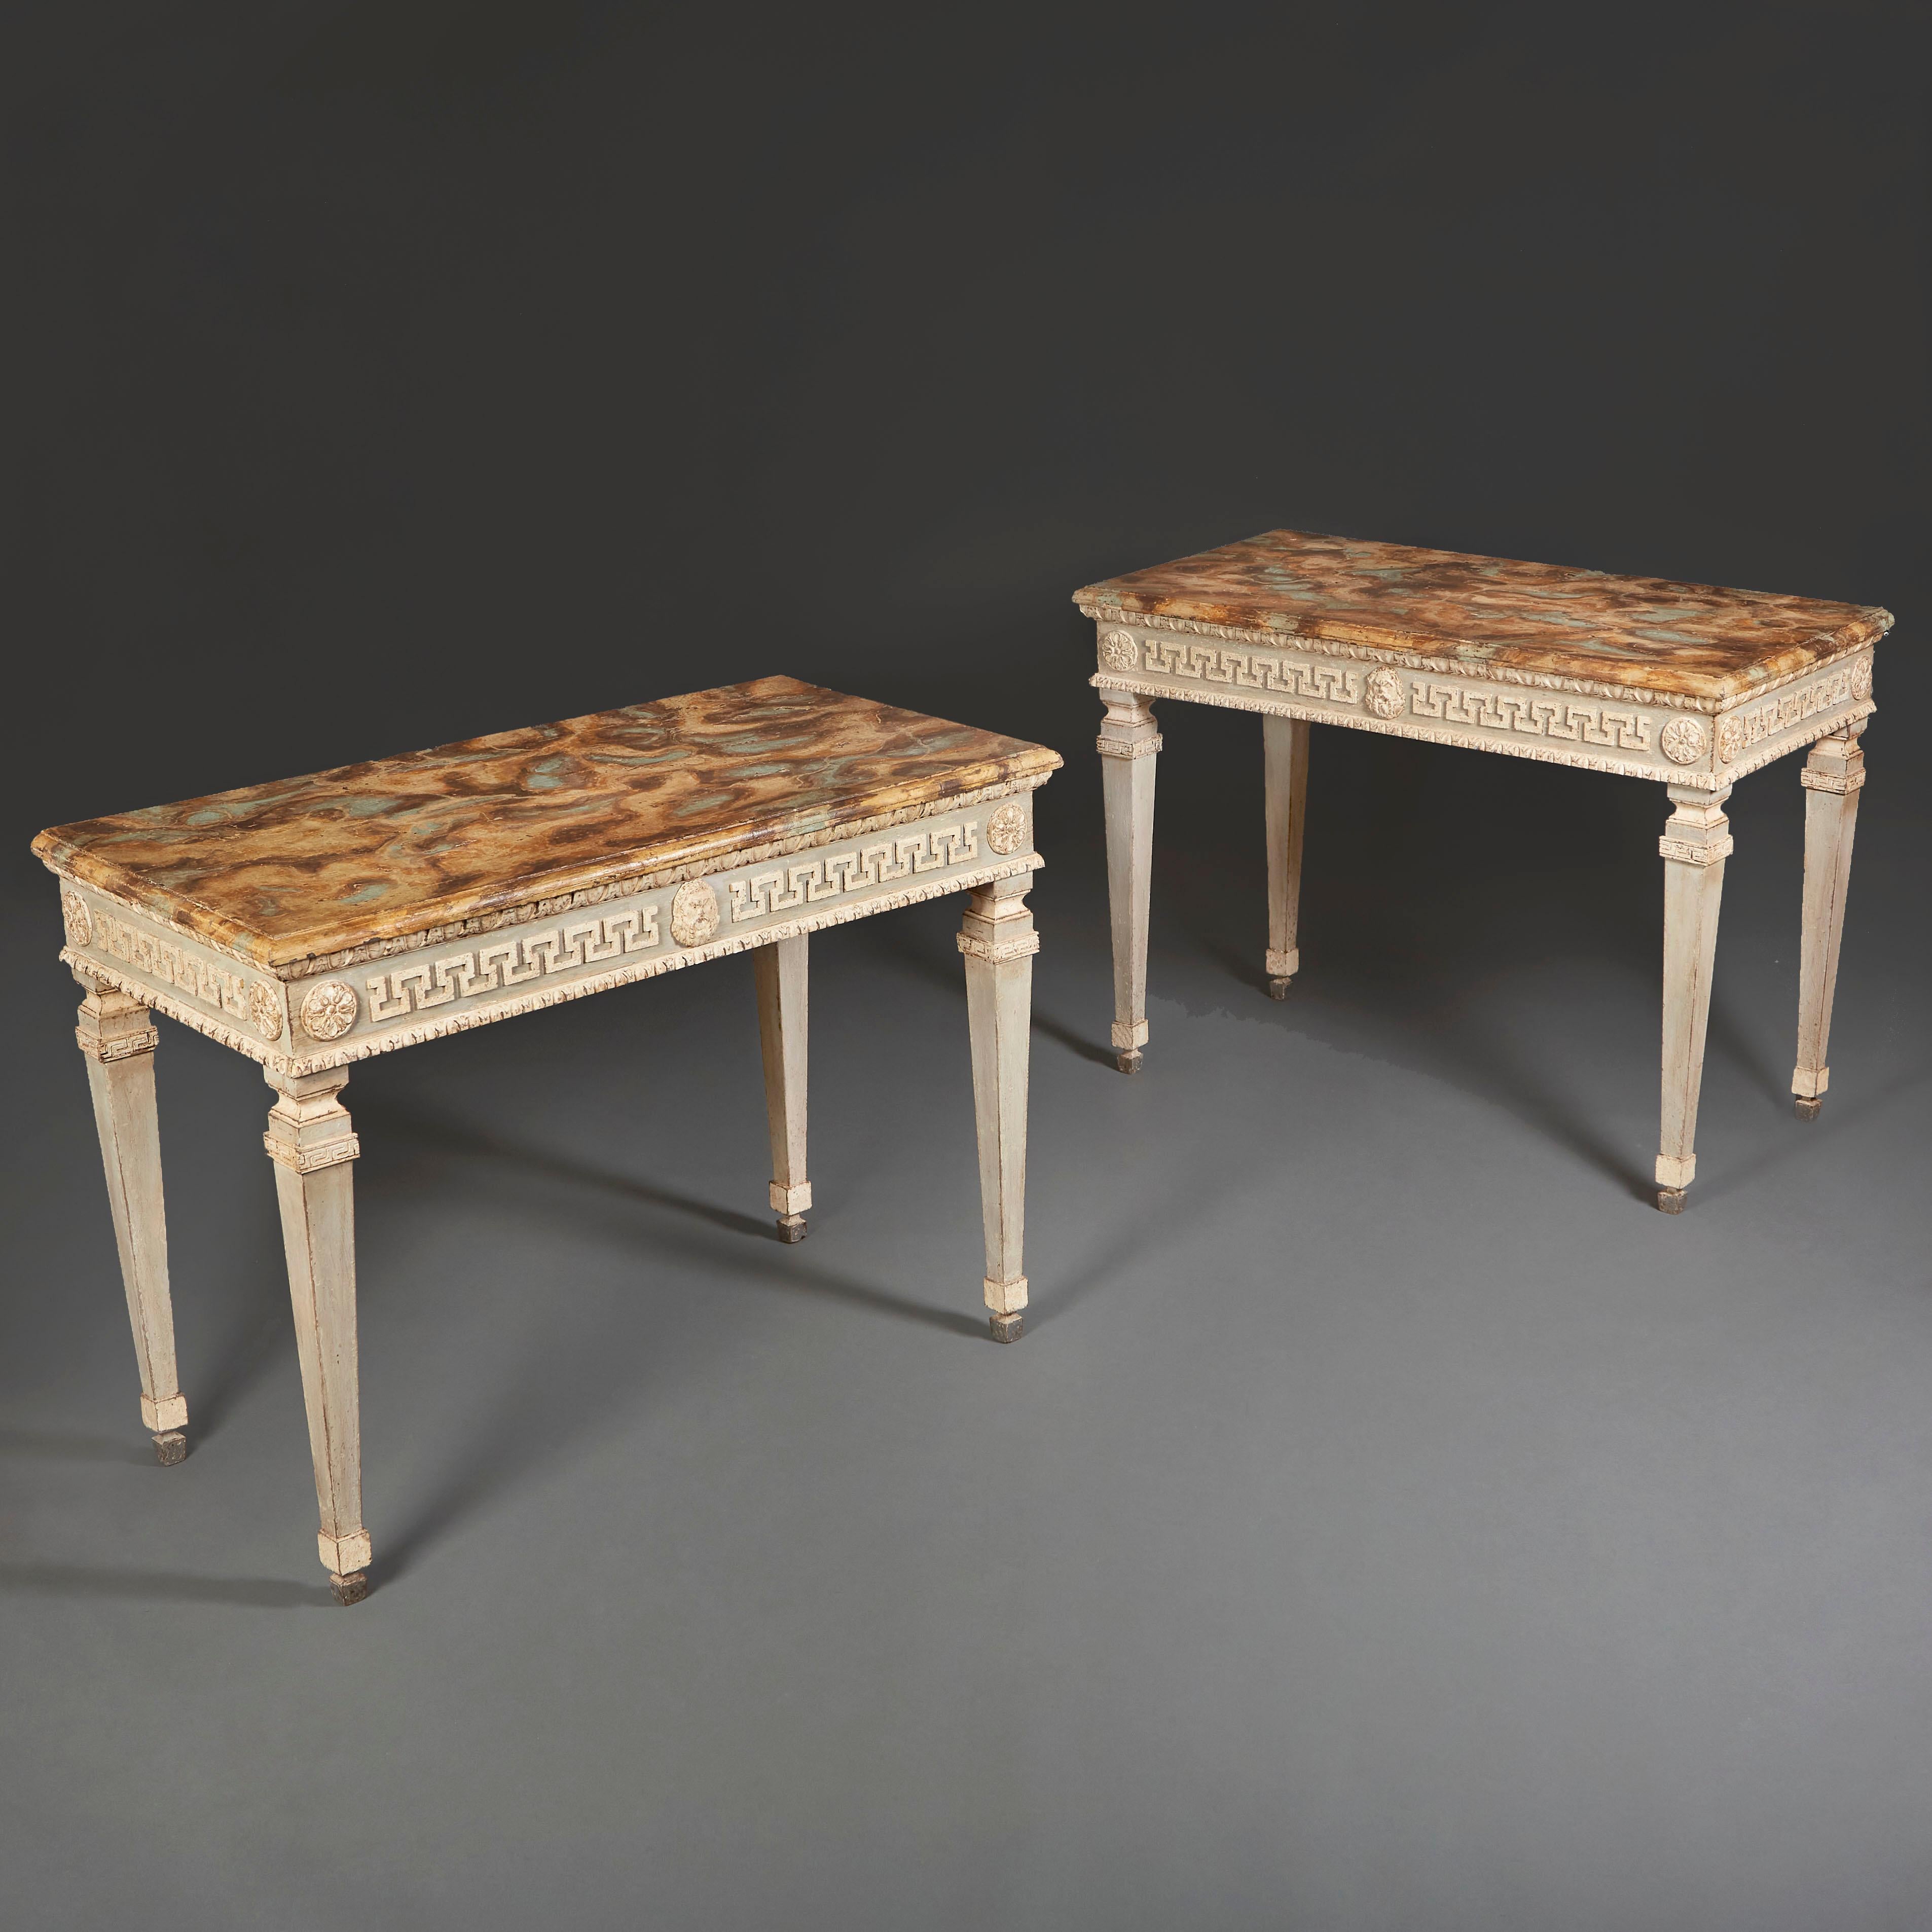 A pair of late 19th century painted console tables in the manner of William Kent, with Greek key and satyr masks to the frieze, egg and dart moulding below the painted tops, all suported on fluted, tapering legs.